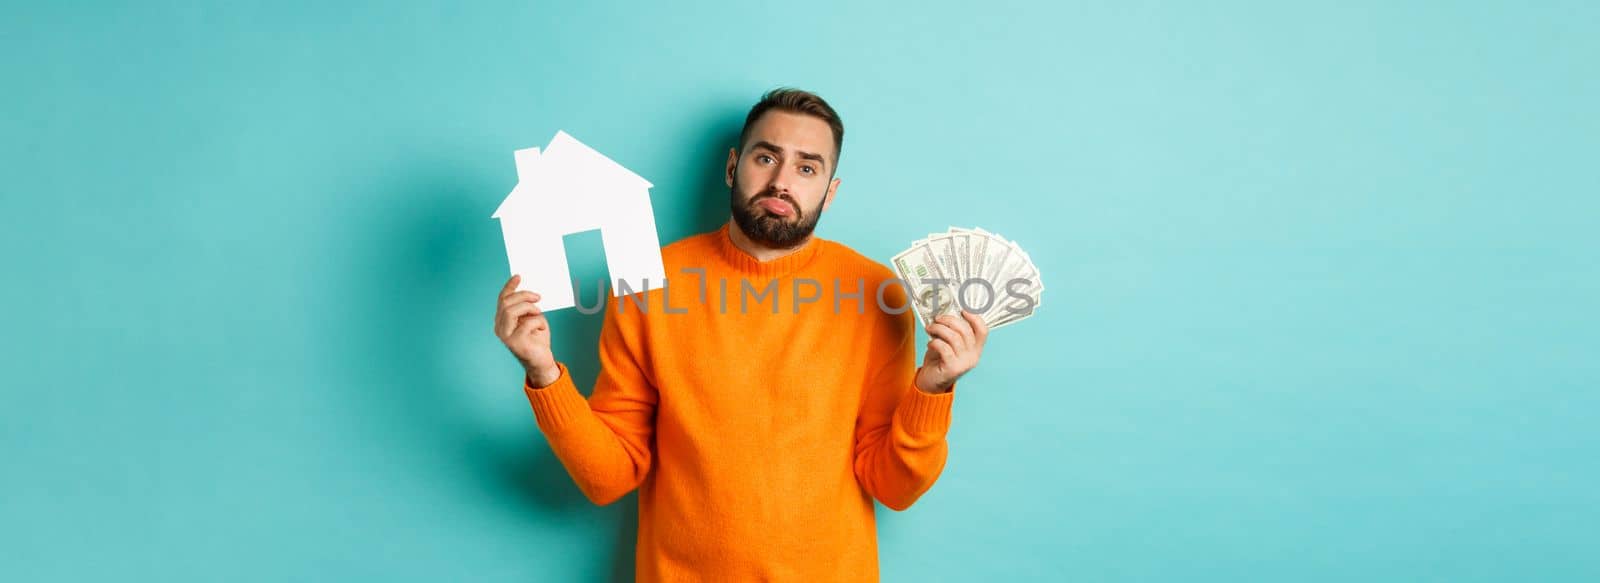 Real estate concept and mortgage concept. Sad and confused man showing money and paper house maket, shrugging upset, standing over light blue background.